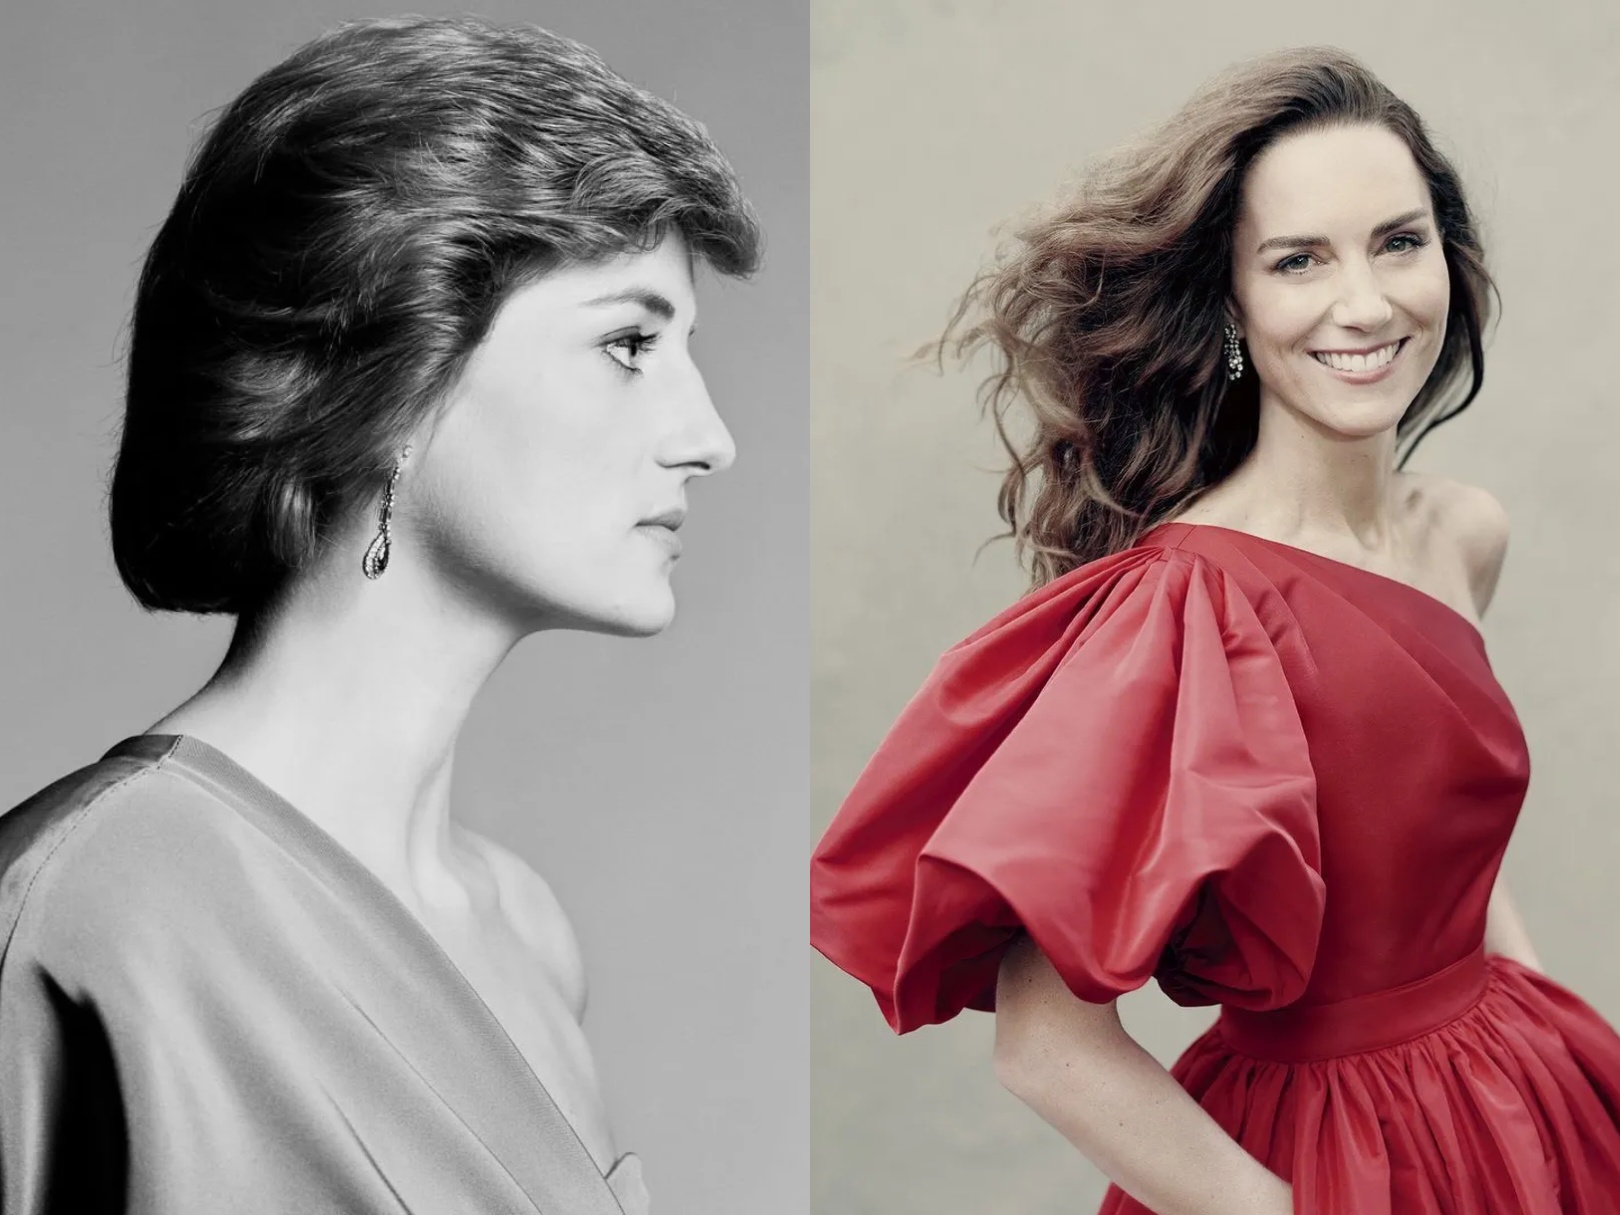 Portraits of Diana, Princess of wales and Kate Middleton